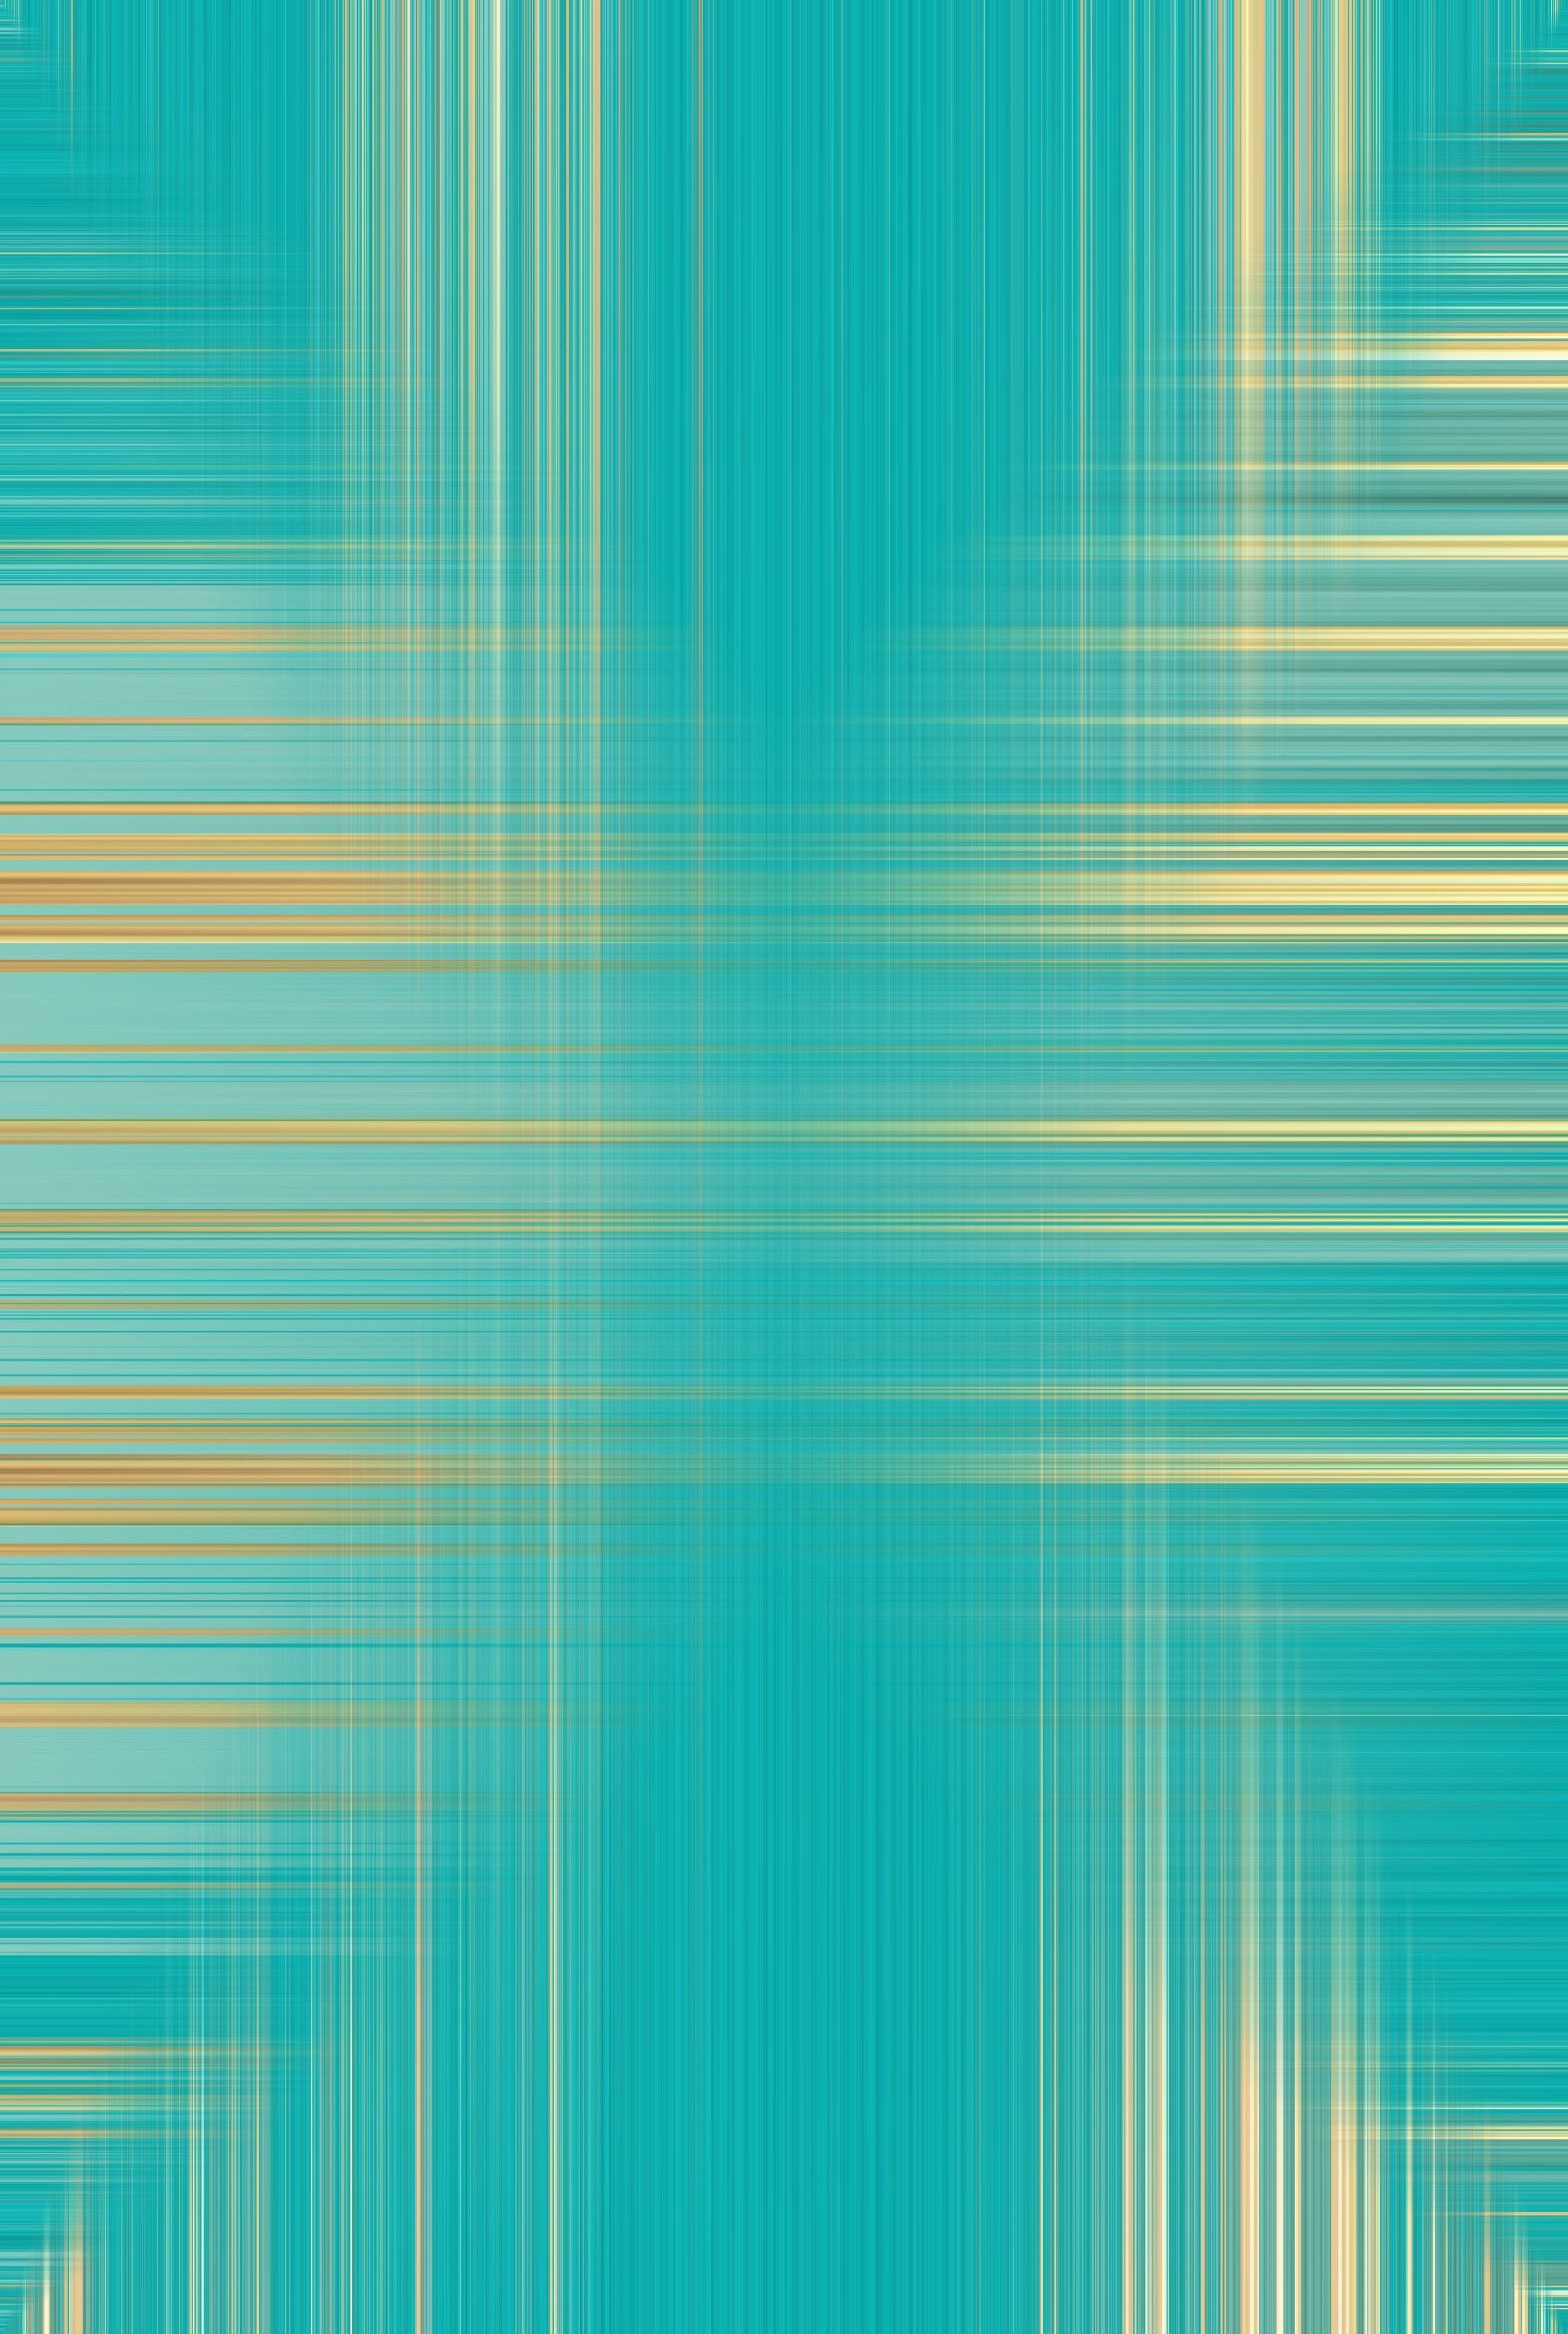 lines, graphics, textures, texture, stripes, turquoise, streaks Free Stock Photo